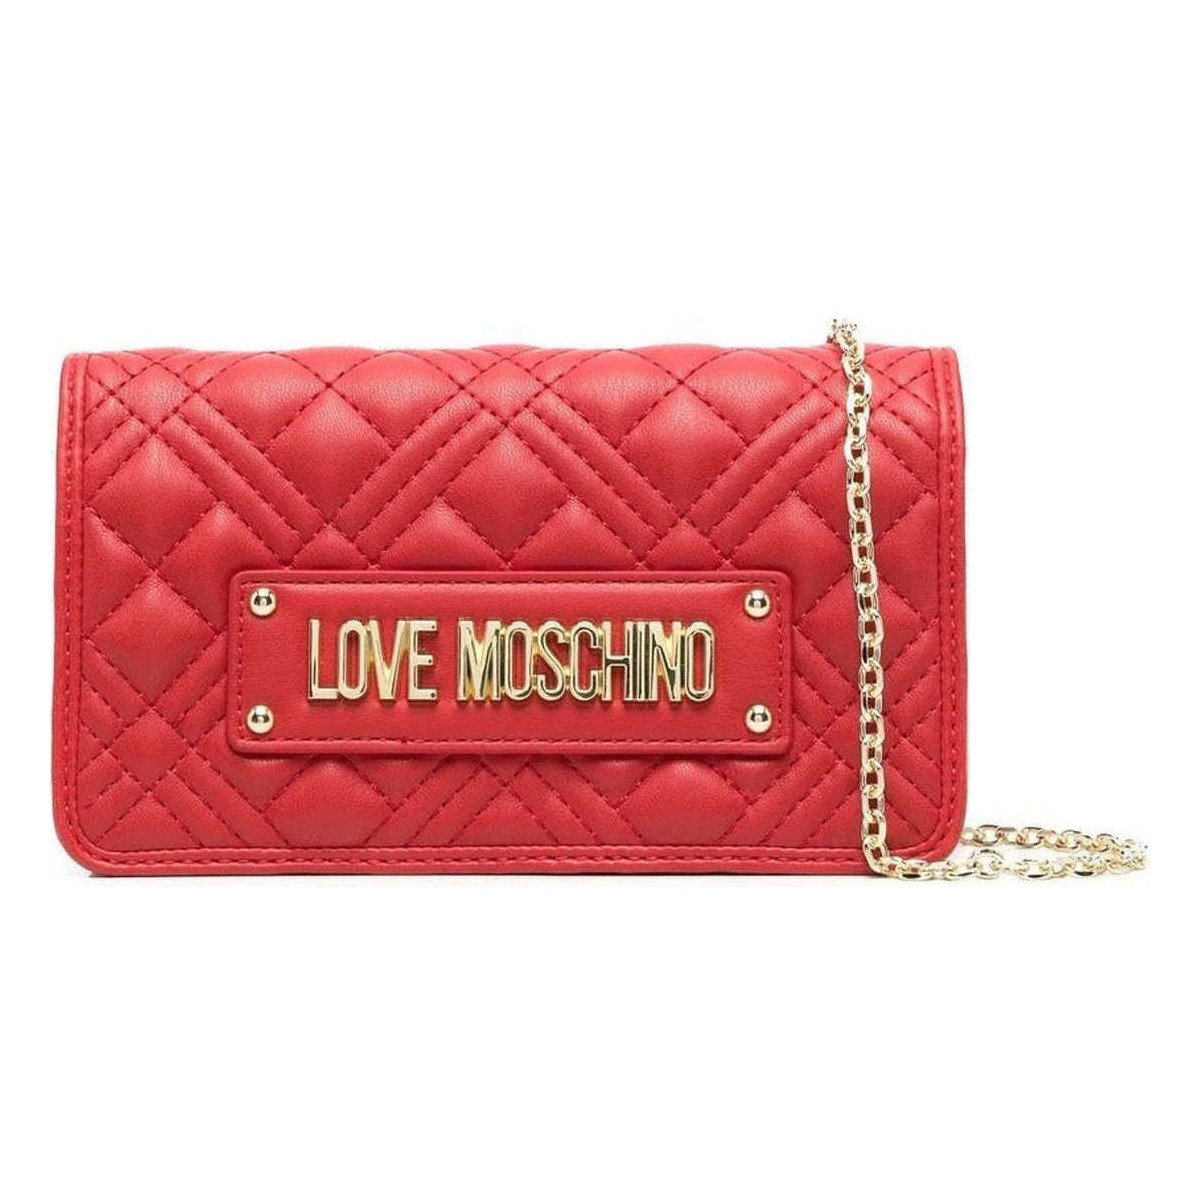 Love Moschino Rose rosso wallet orsQv0Md